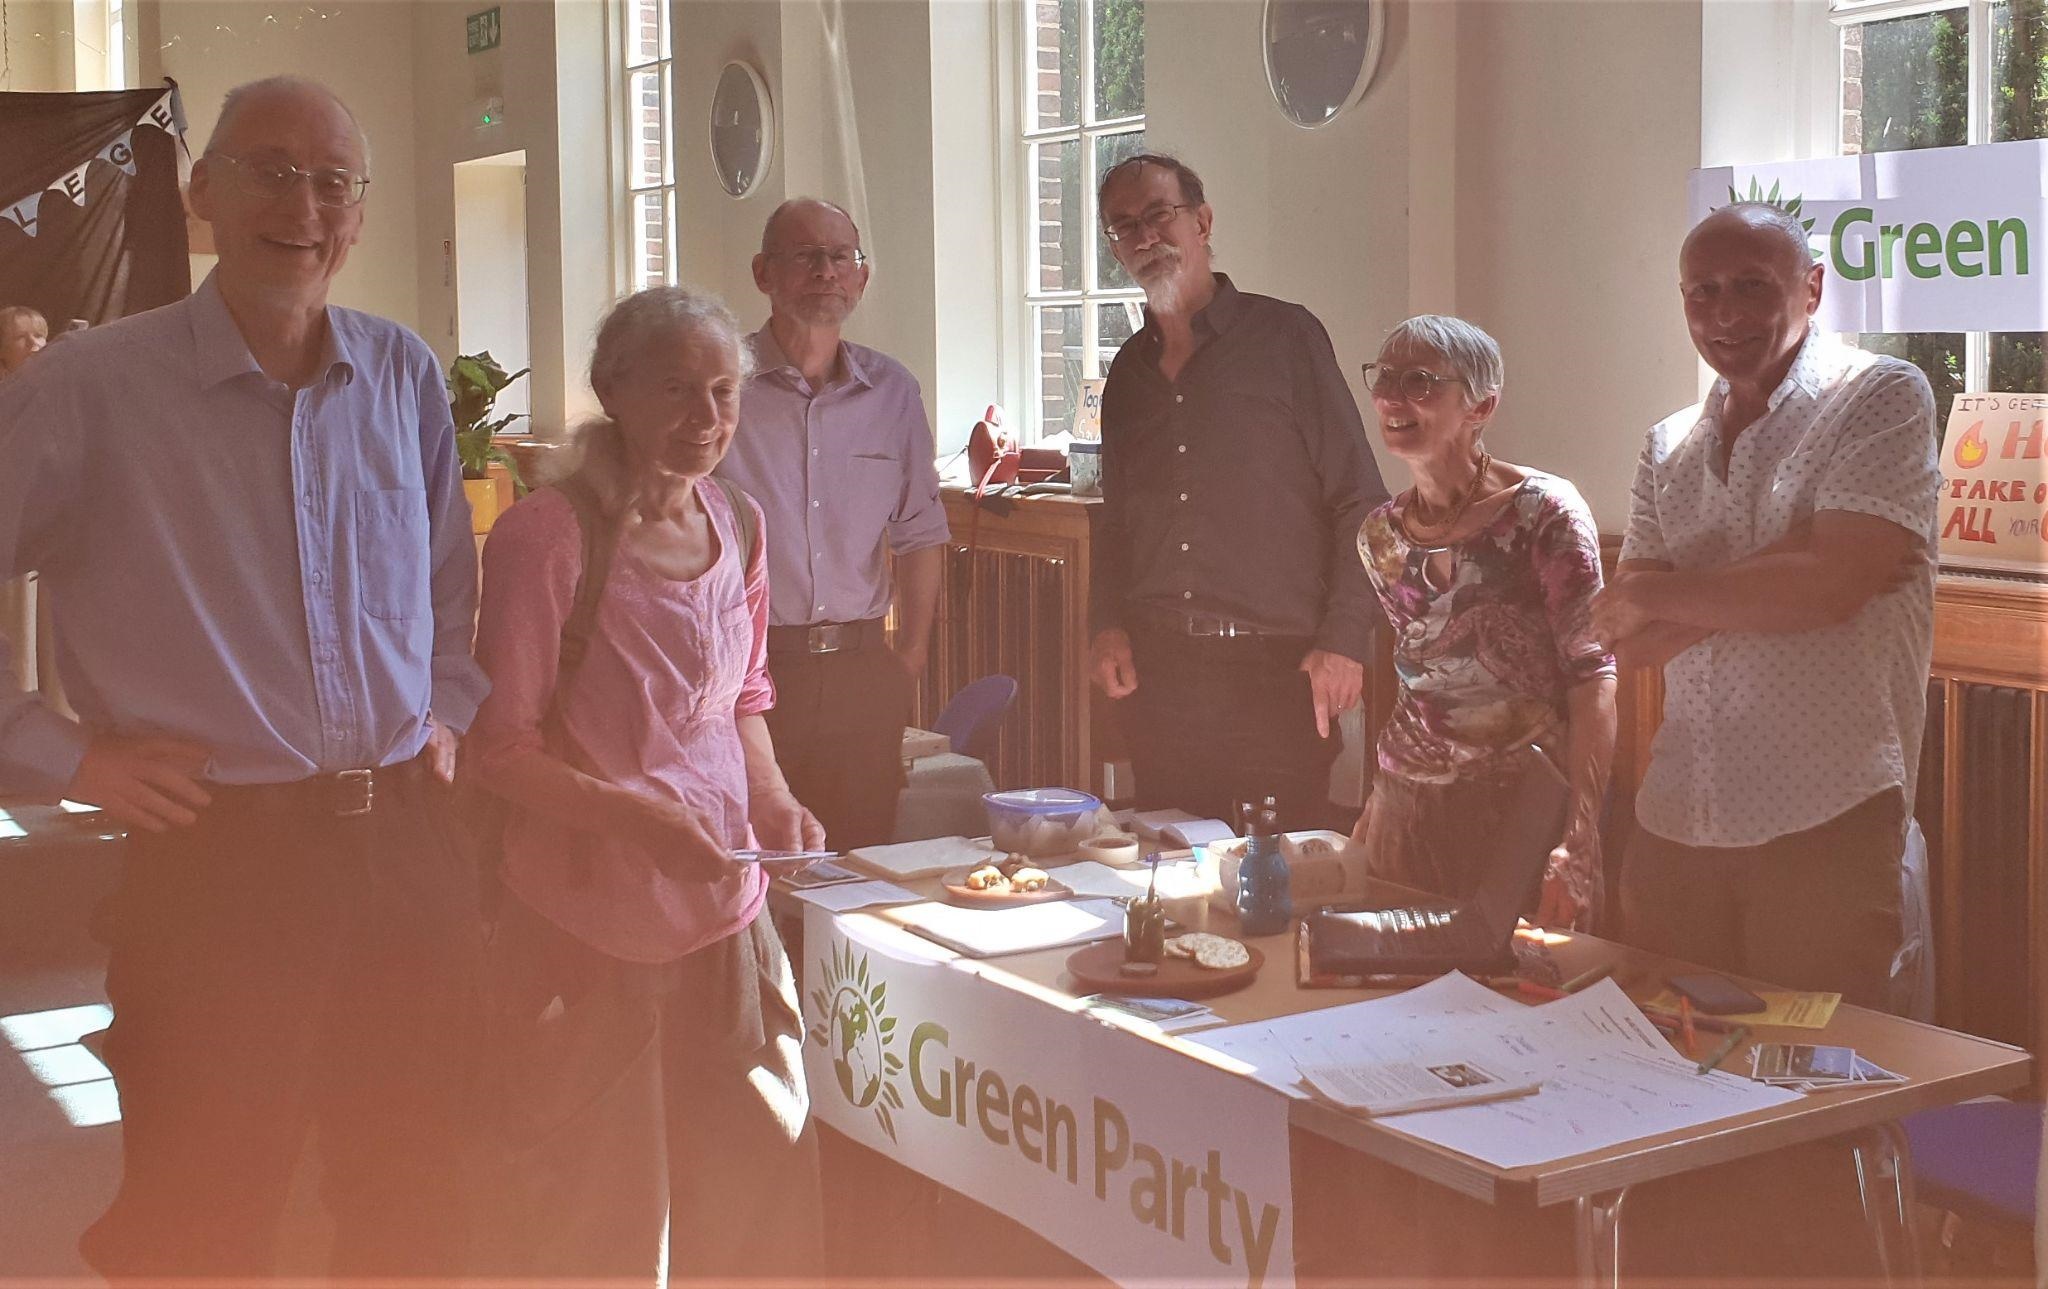 County Durham Green Party at EcoFest 2023